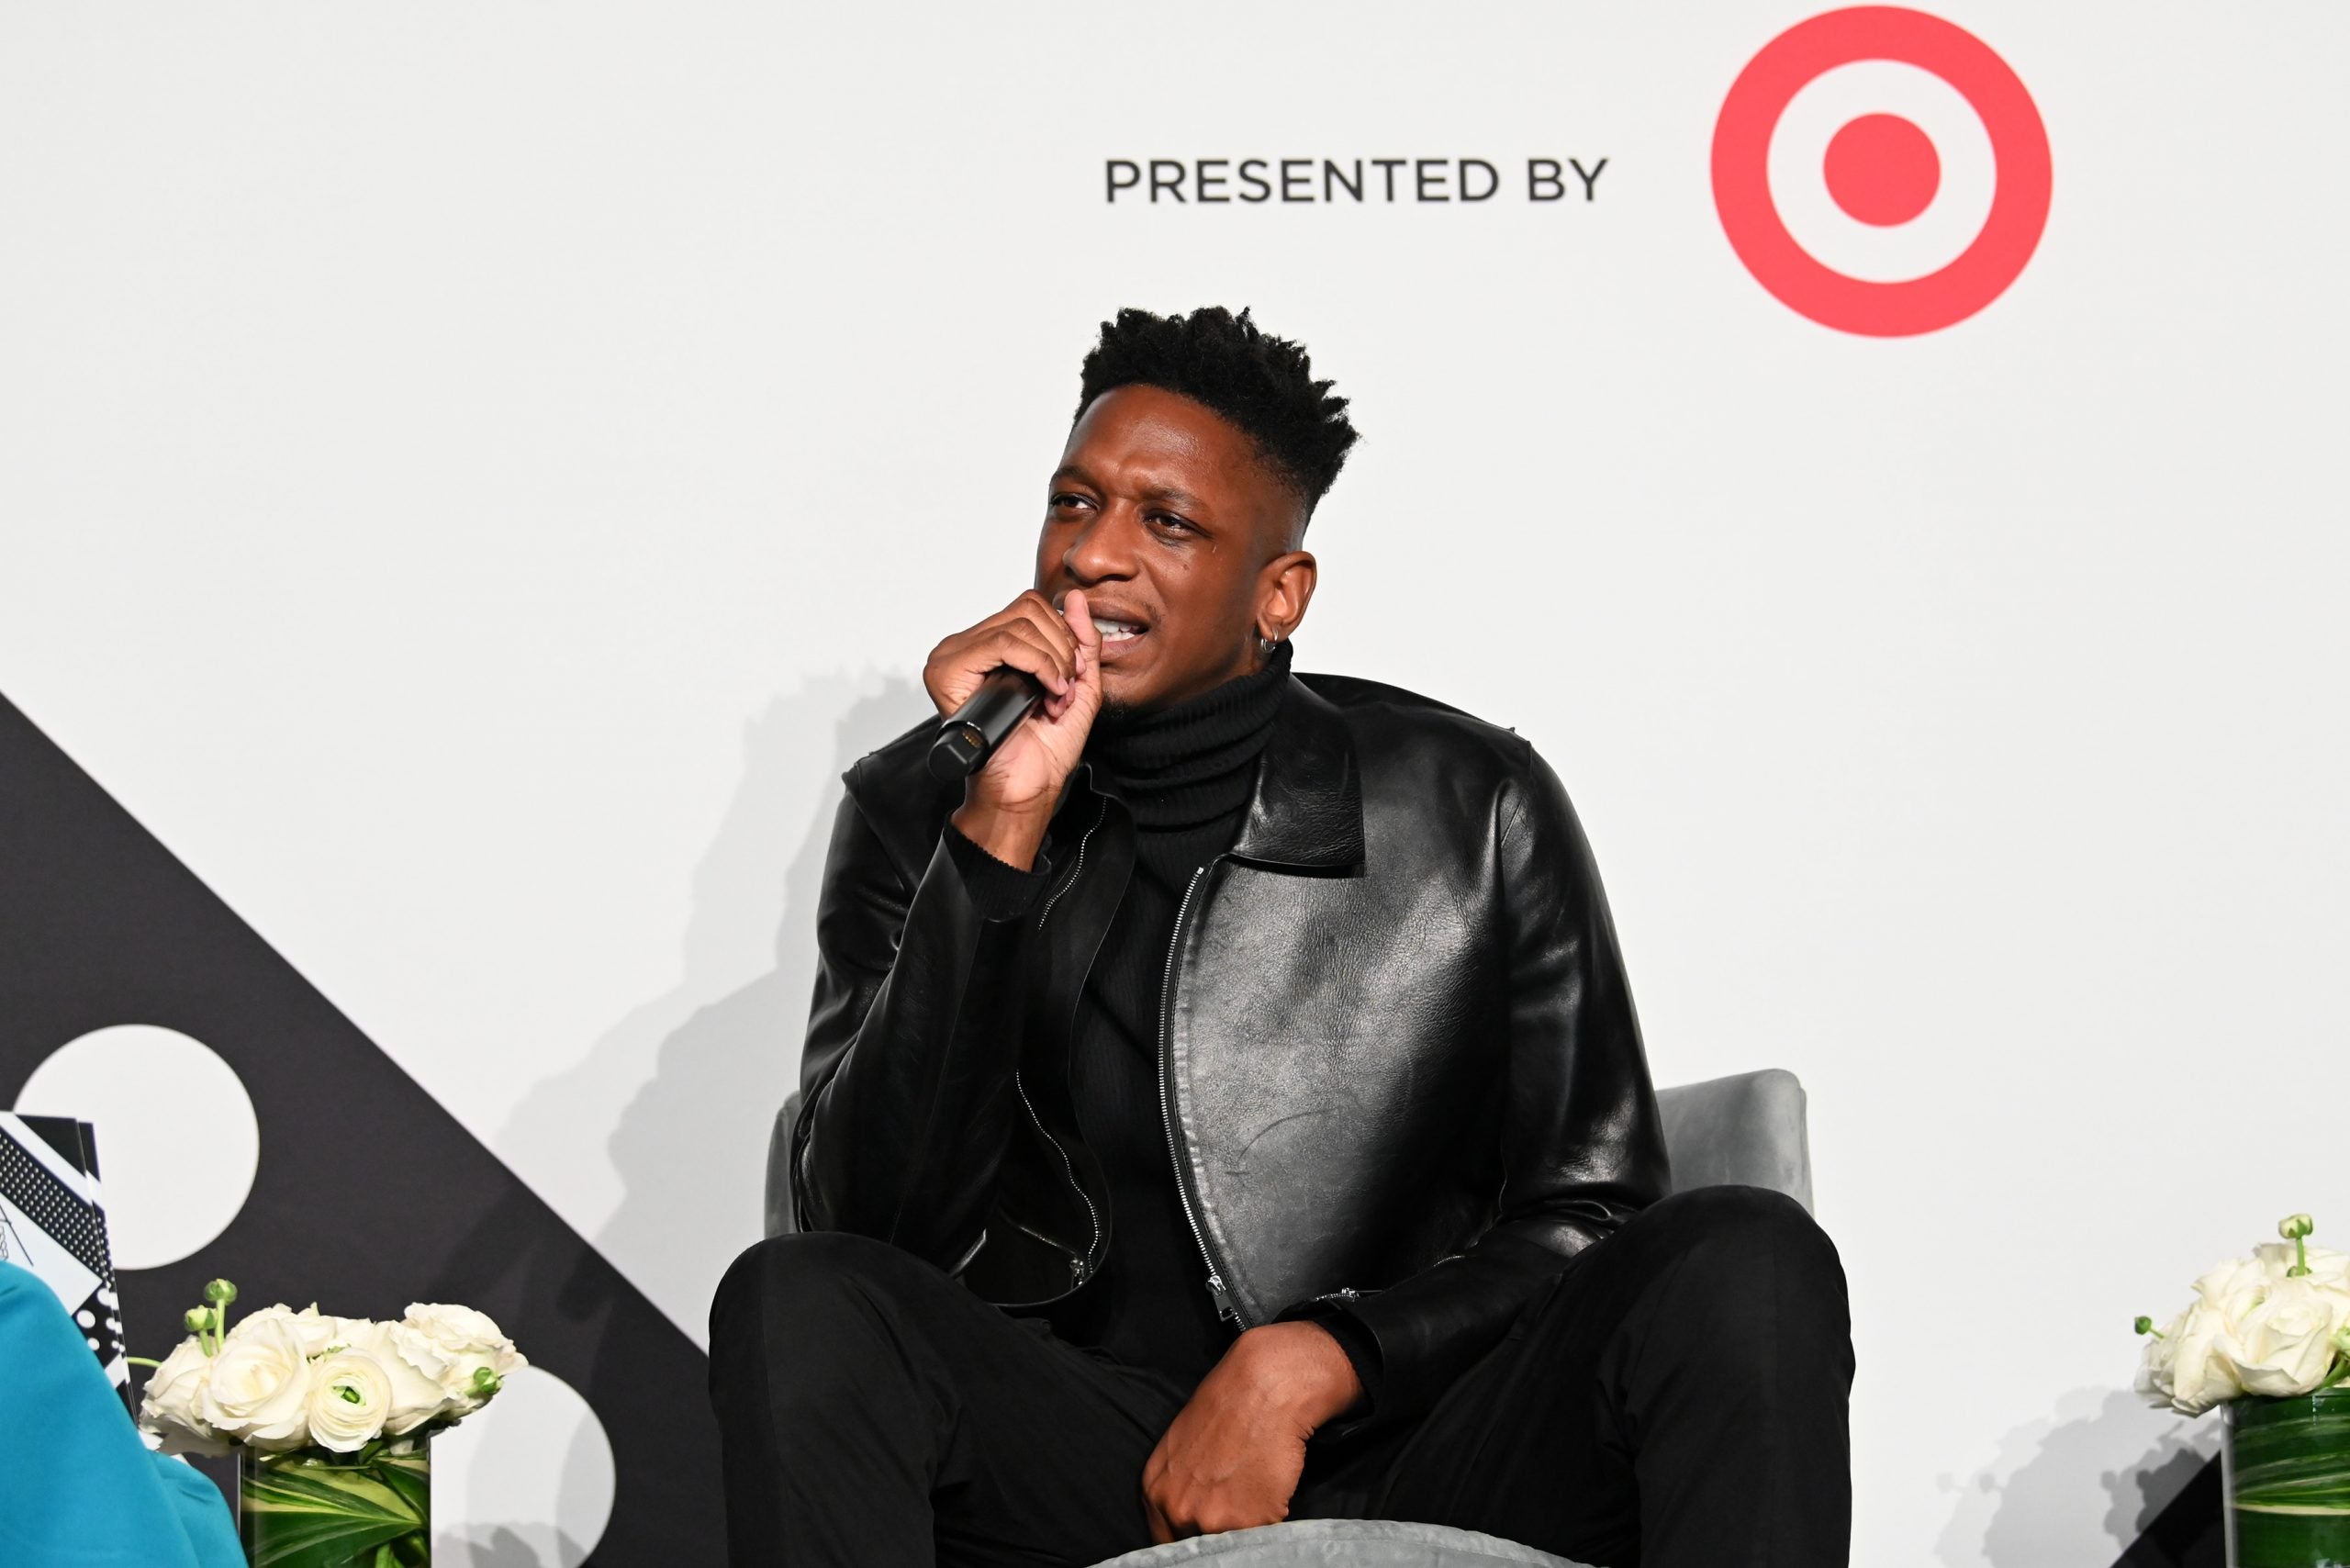 Inside The Life Of A Successful Hollywood Stylist With Law Roach And Kollin Carter